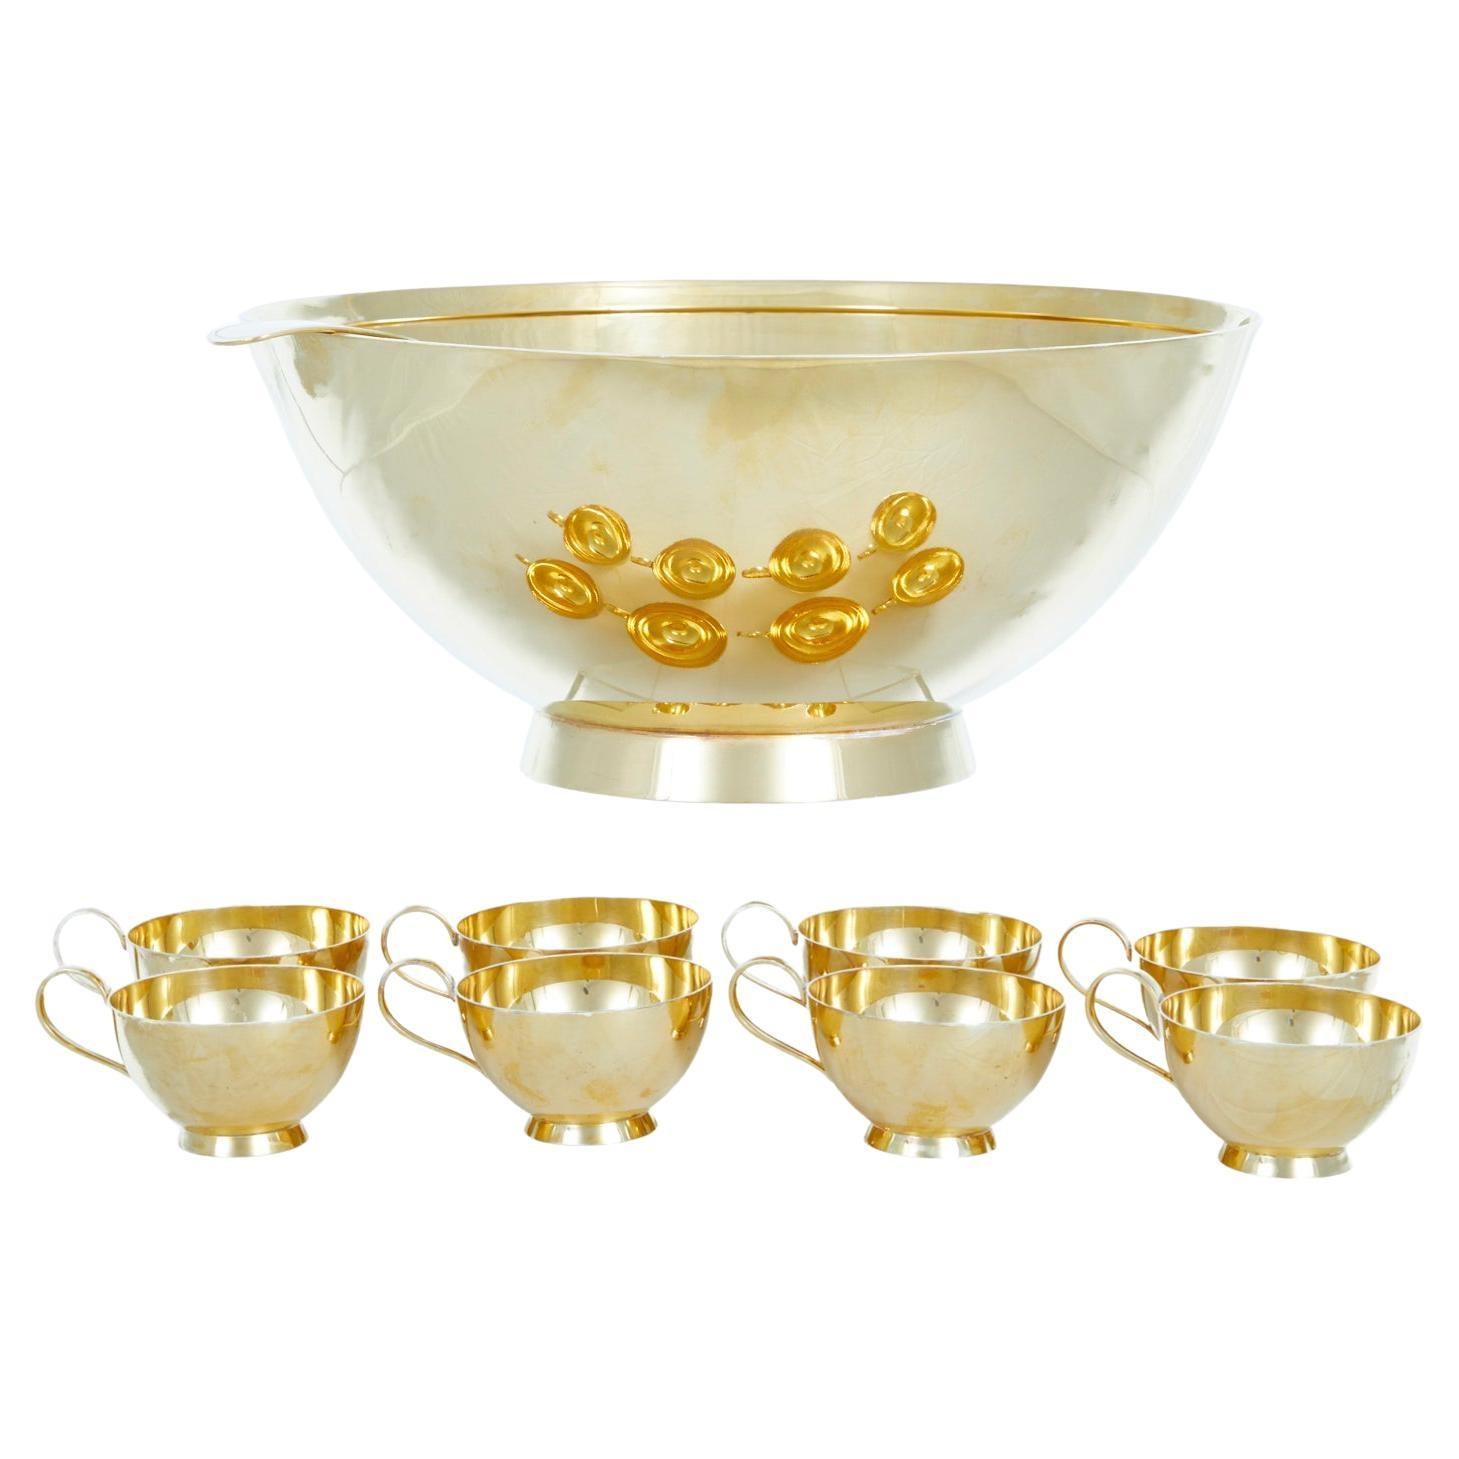 Tiffany & Co. Sterling Silver / Gilt Punch Bowl Service / 8 People